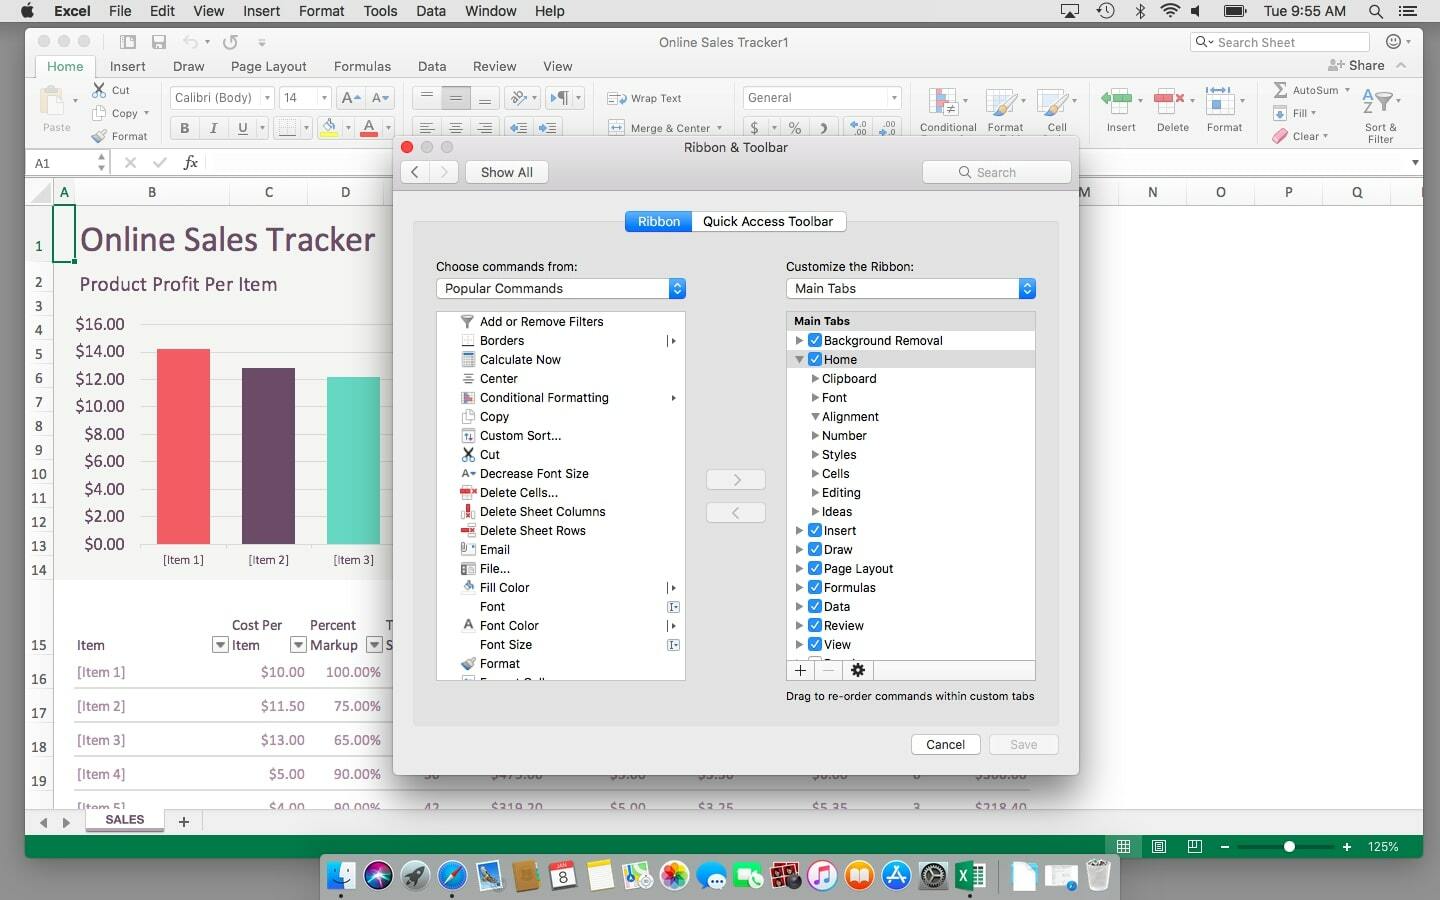 microsoft office excel 2013 and office for mac 15 compatibility problems